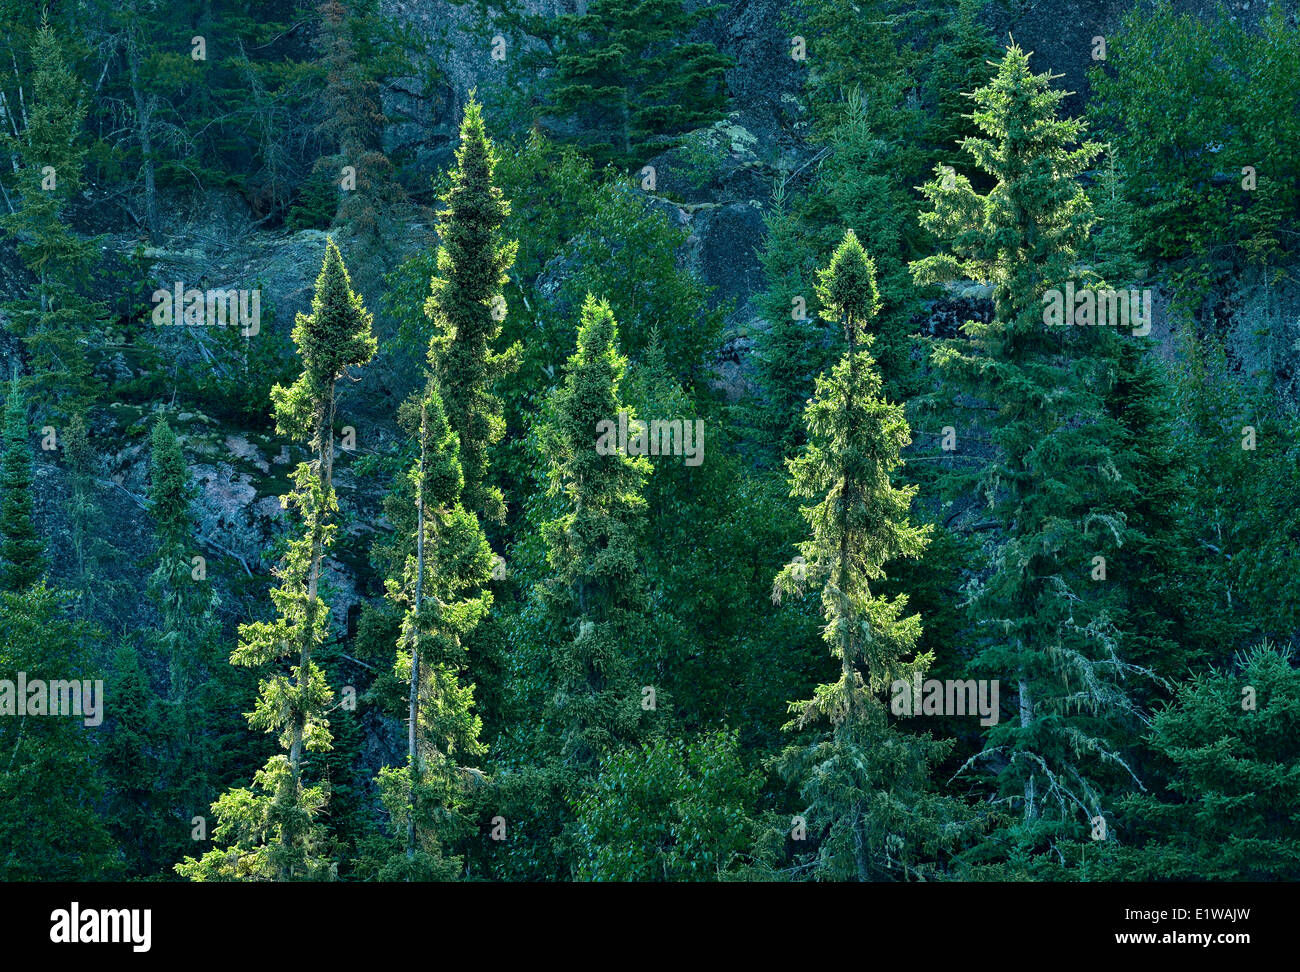 Spruce trees (Picea) growing on hillside in boreal forest, Nopiming Provincial Park, Manitoba, Canada Stock Photo